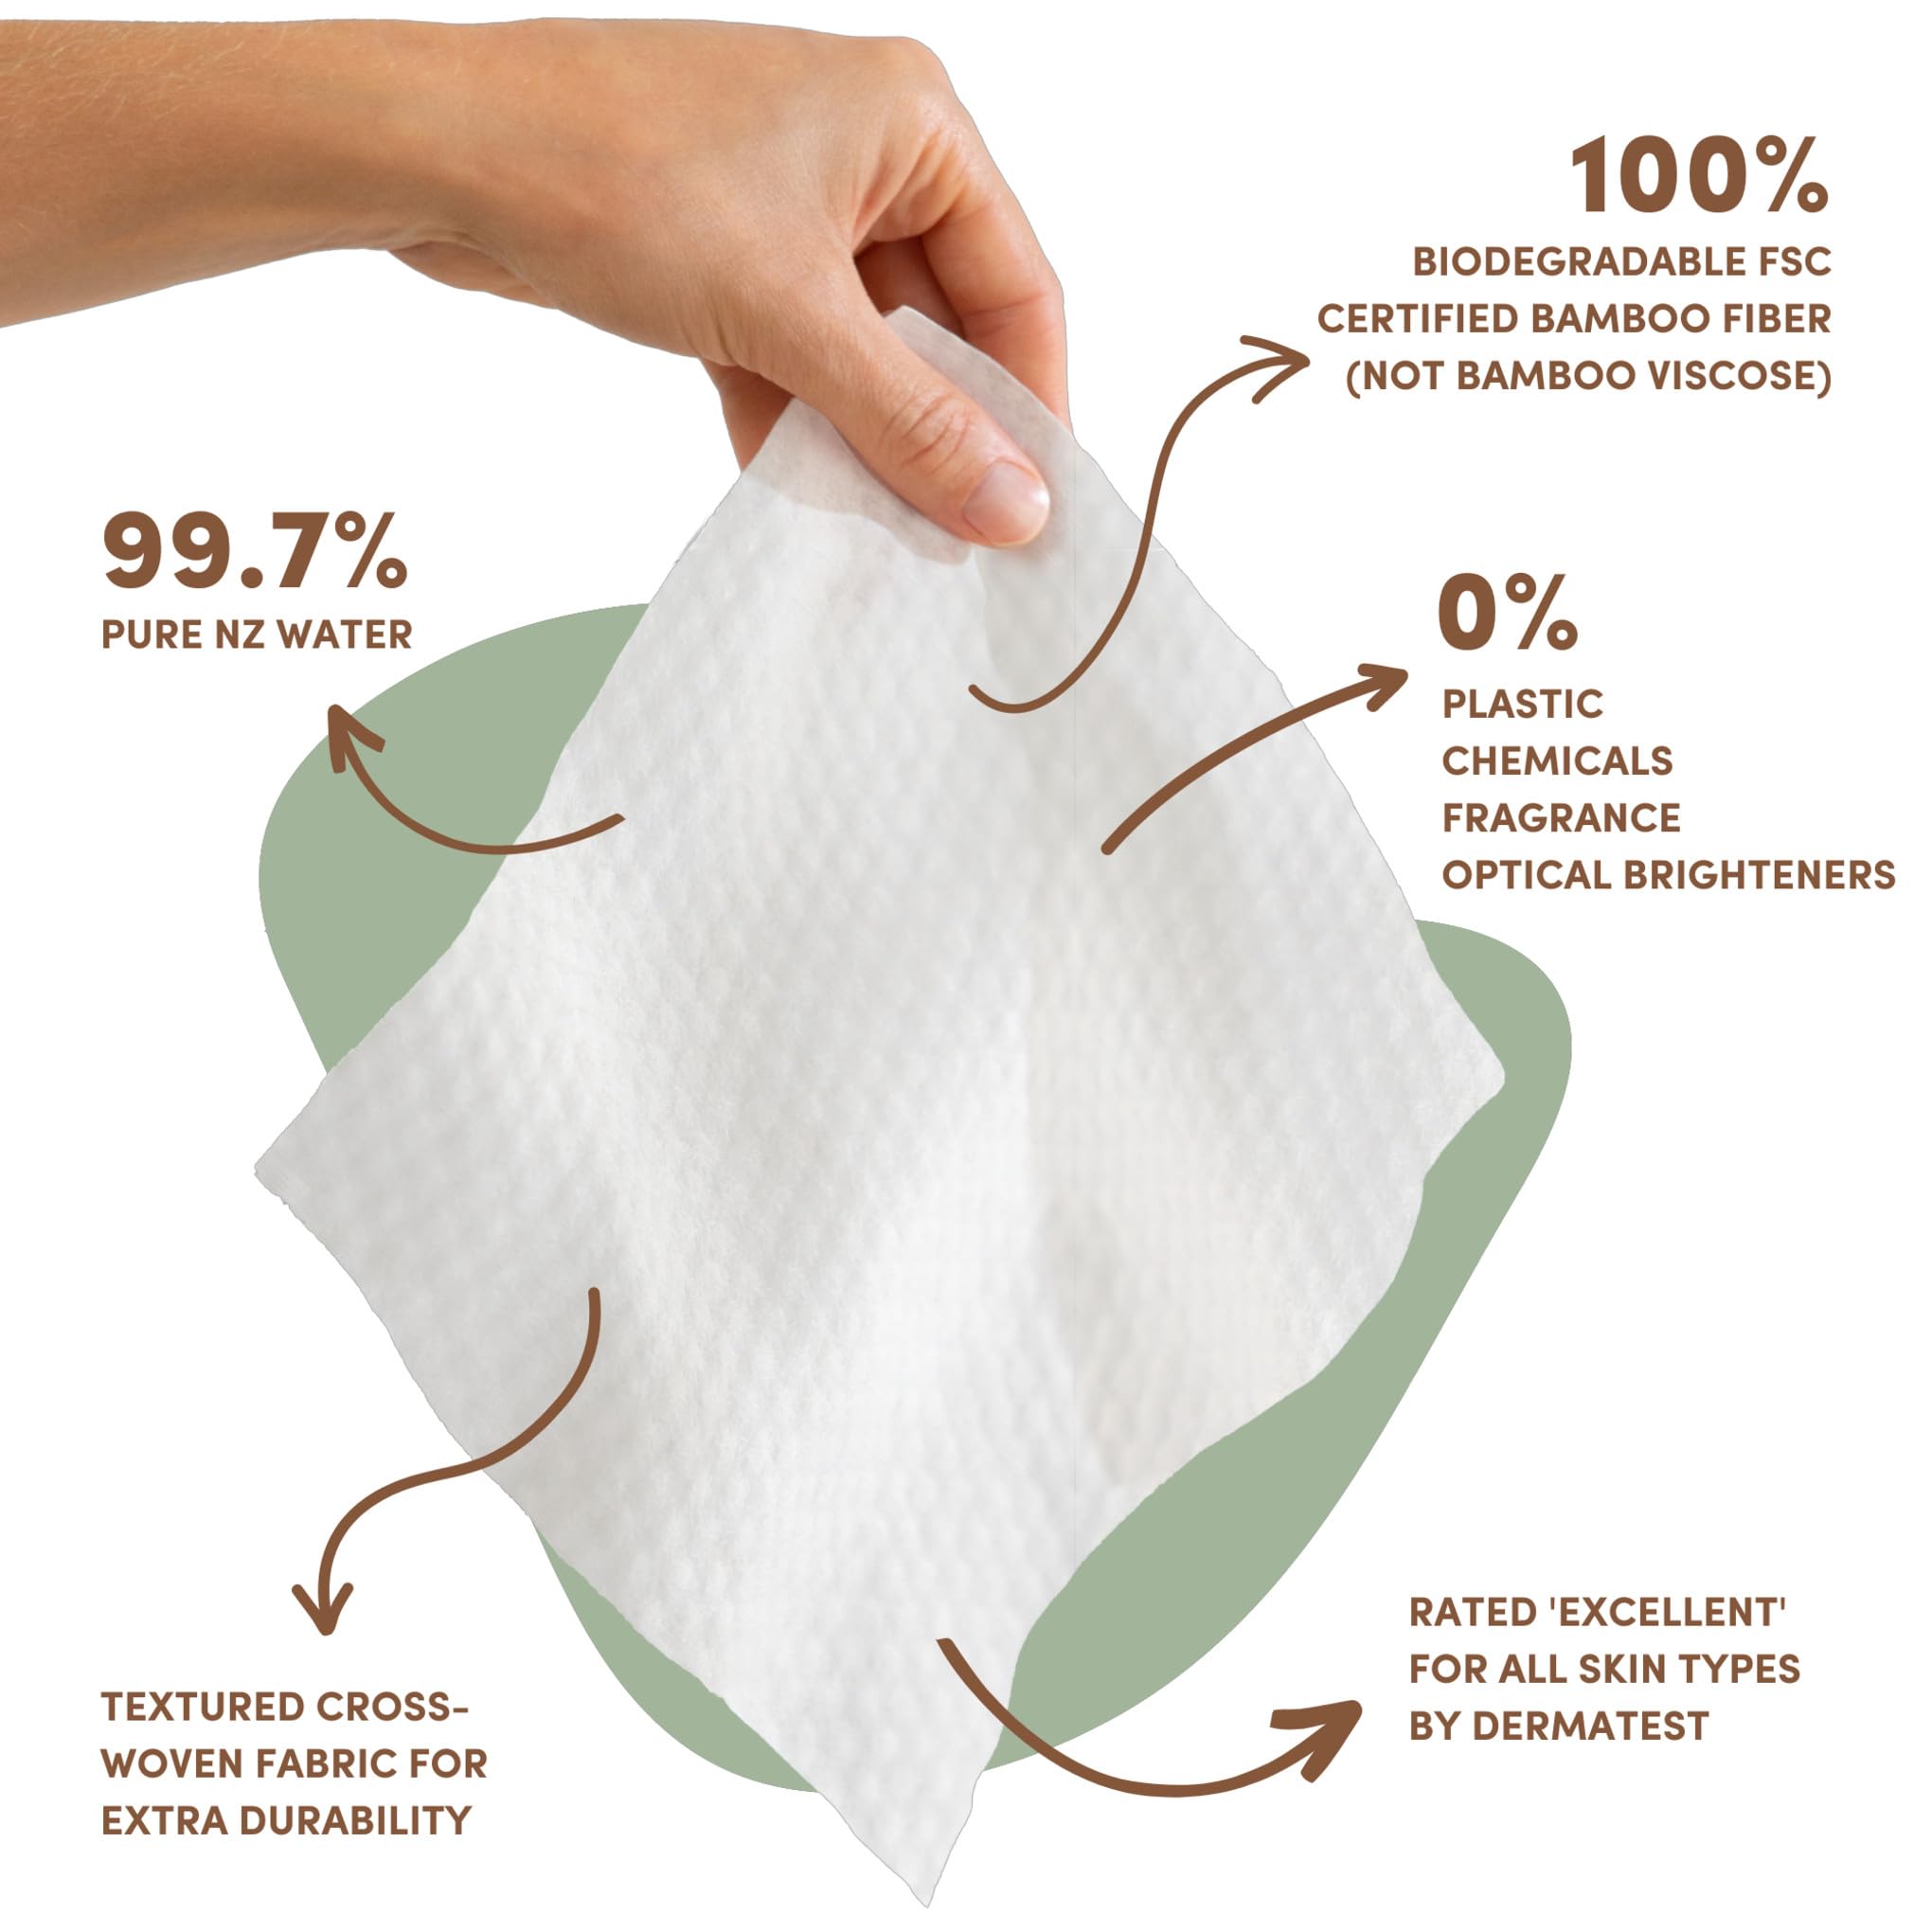 Terra Bamboo Baby Wipes: Pure Water Wipes, 99.7% Pure New Zealand Water, 100% Biodegradable Bamboo Fiber, 0% Plastic, Unscented Baby Wipes for Sensitive Skin, 1 Pack of 24 Wipes